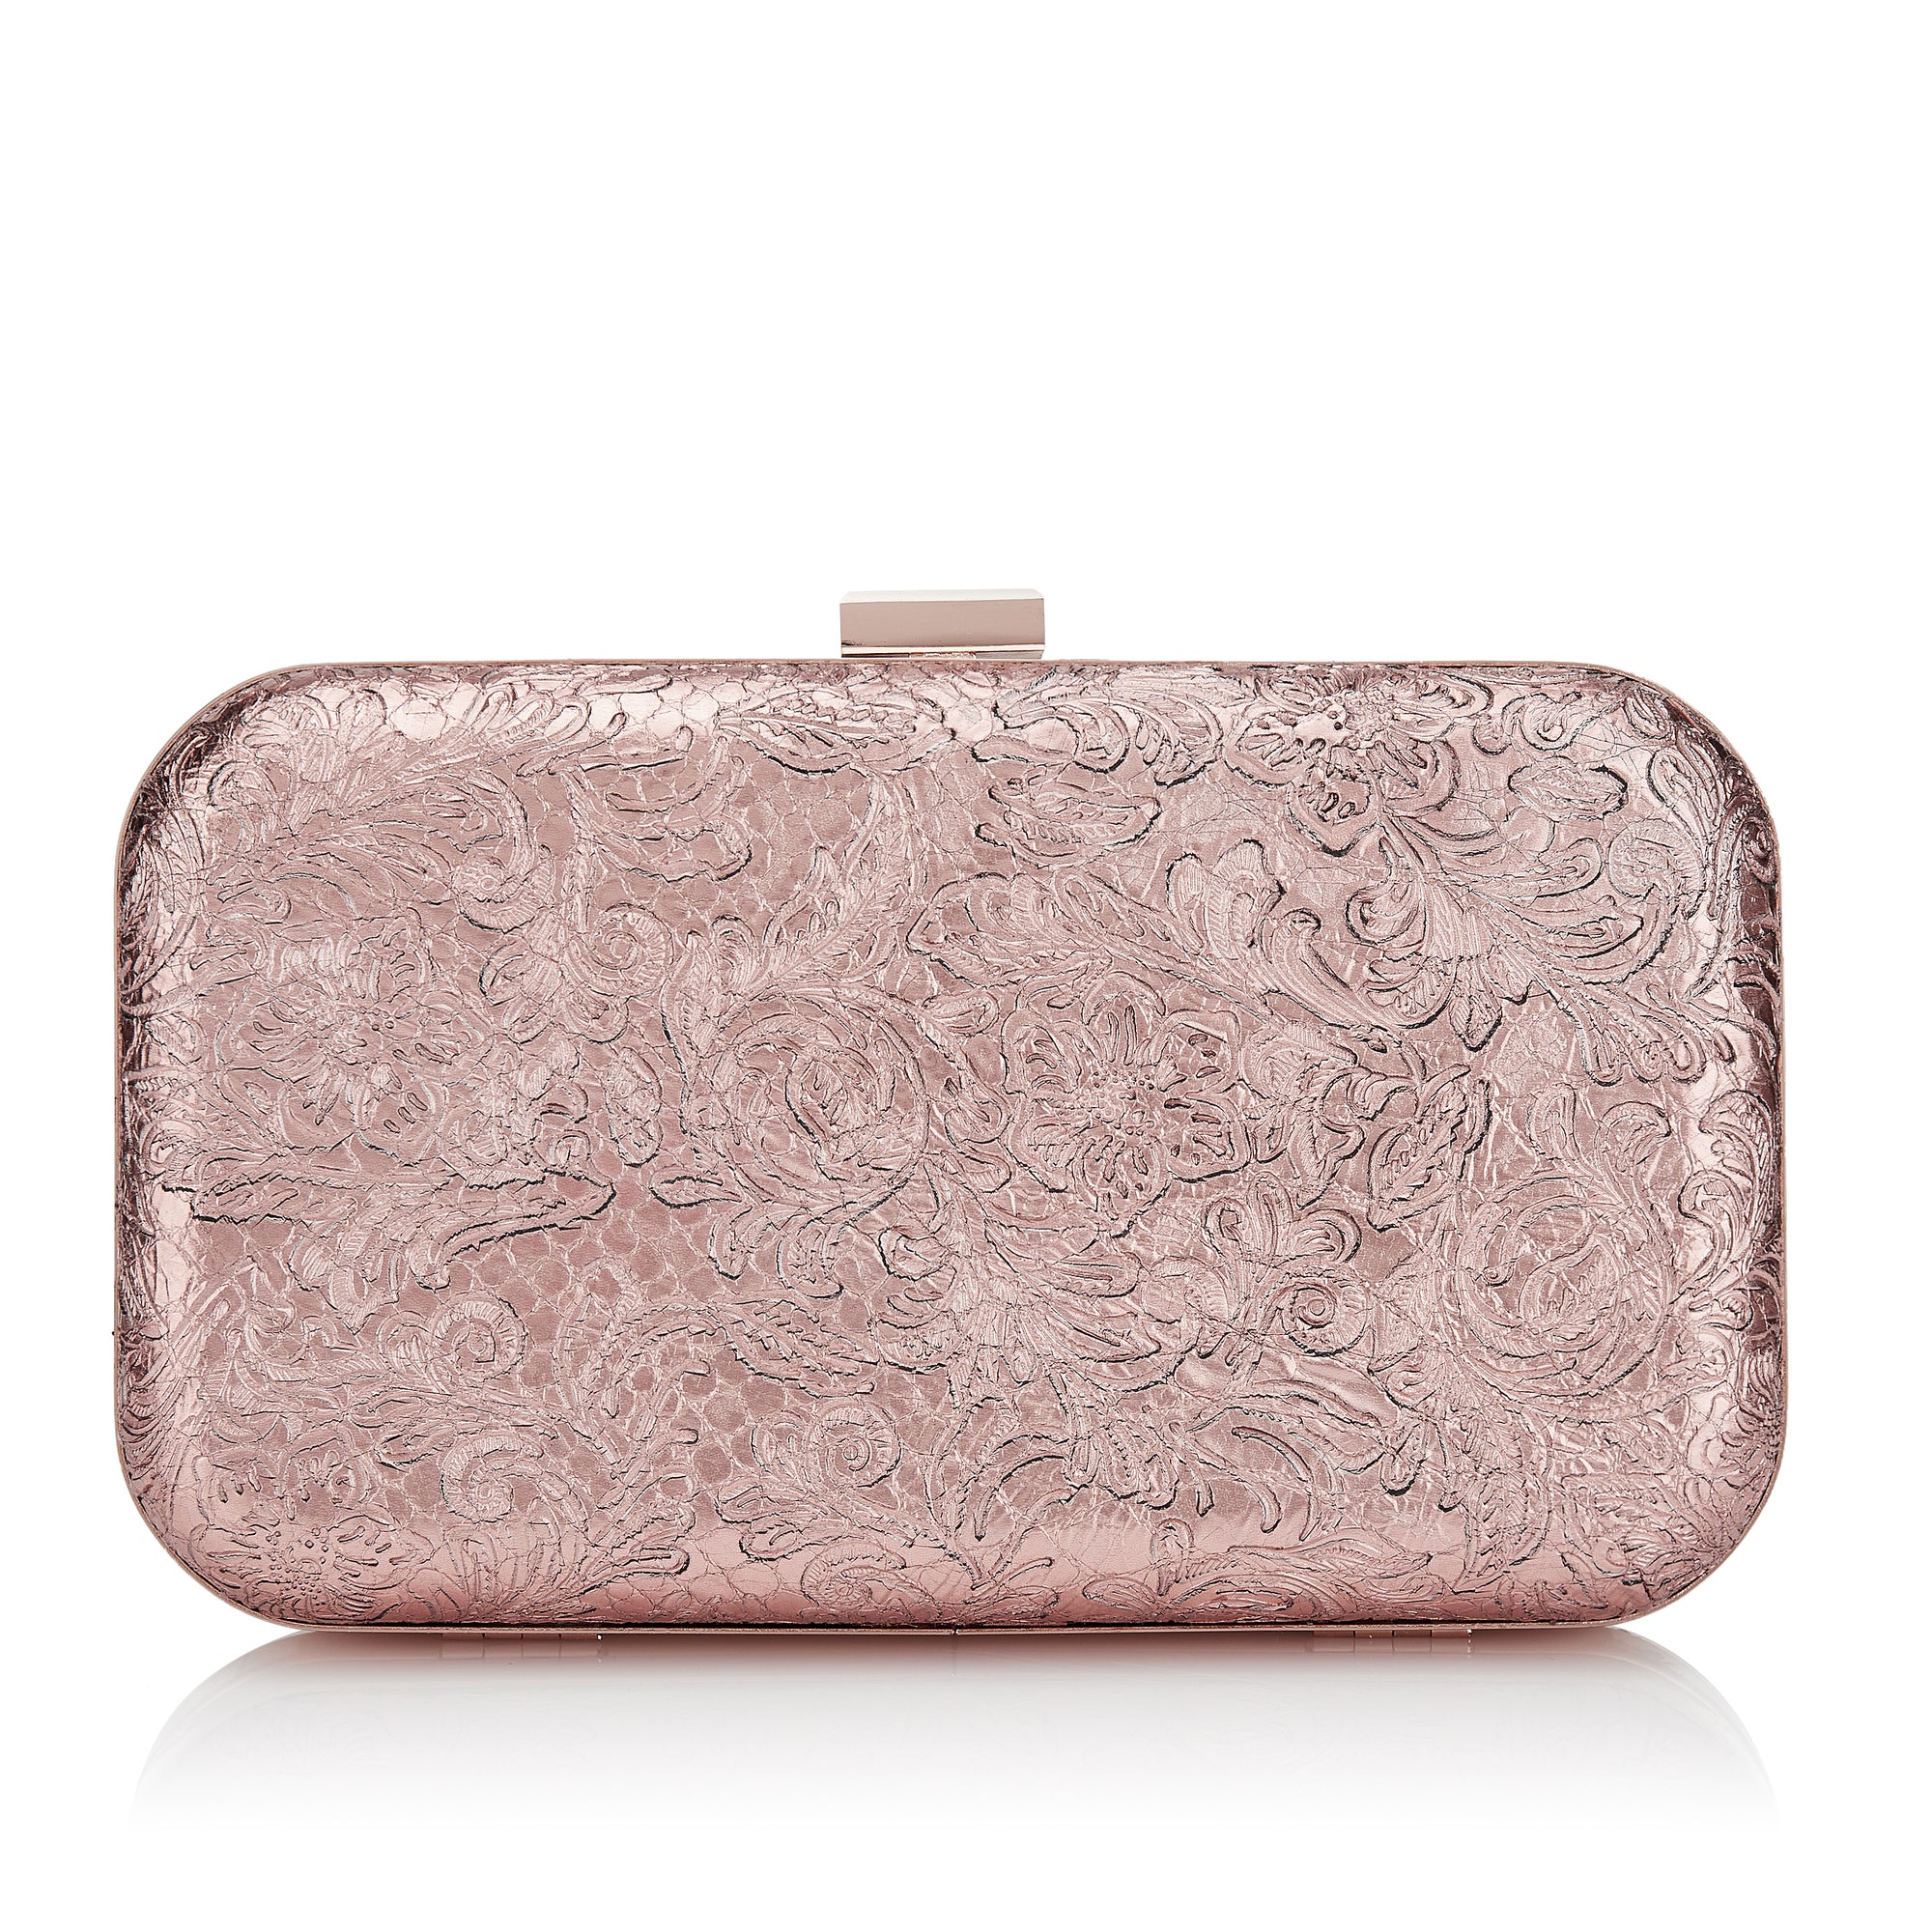 ROSE GOLD BROCADE LEATHER CLUTCH